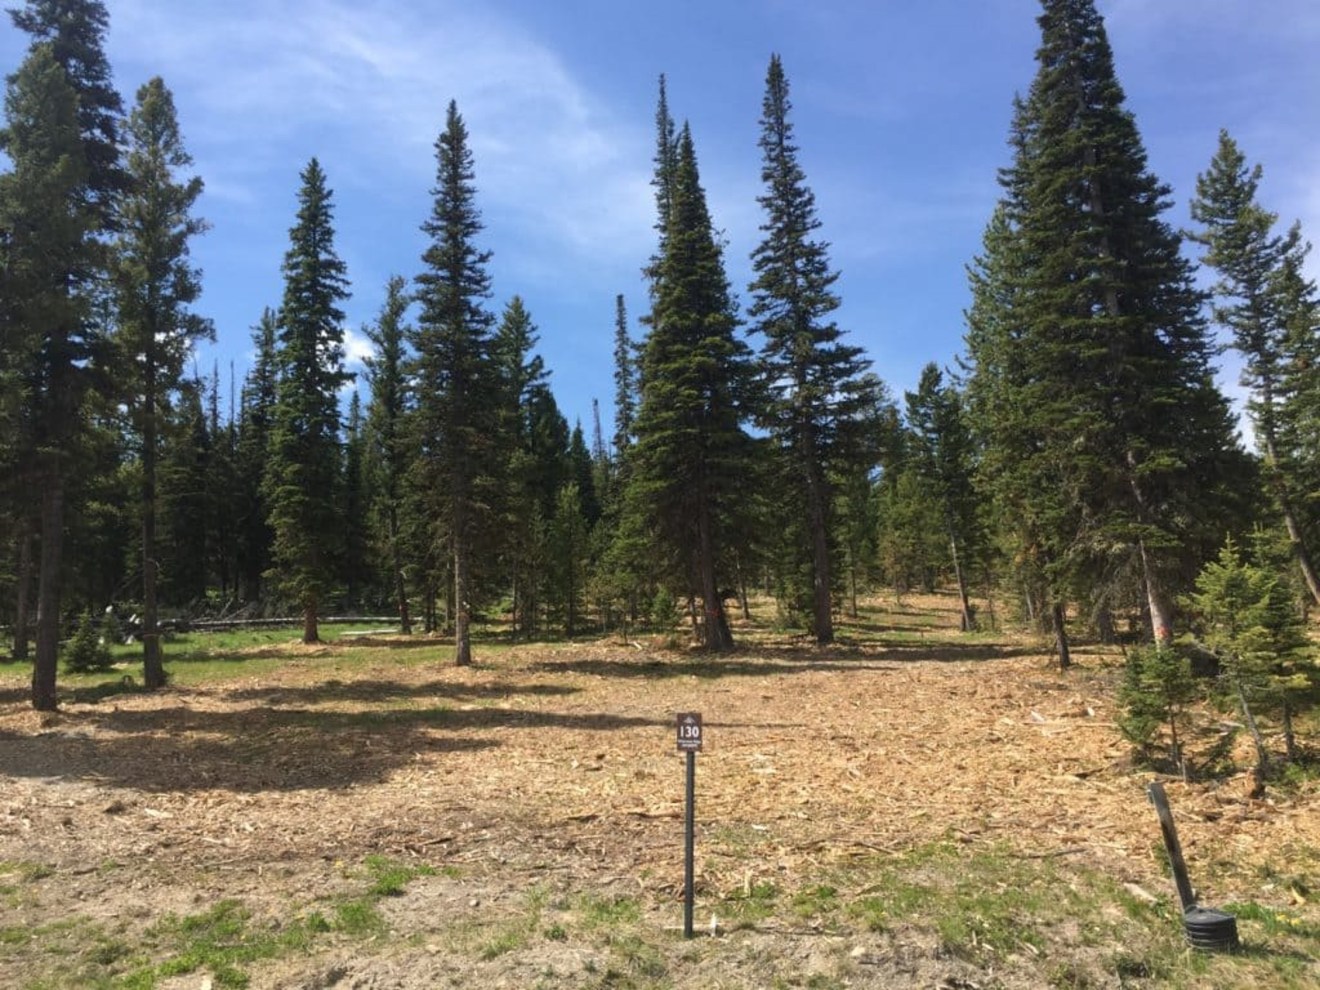 Land cleared under a stand of evergreen trees.